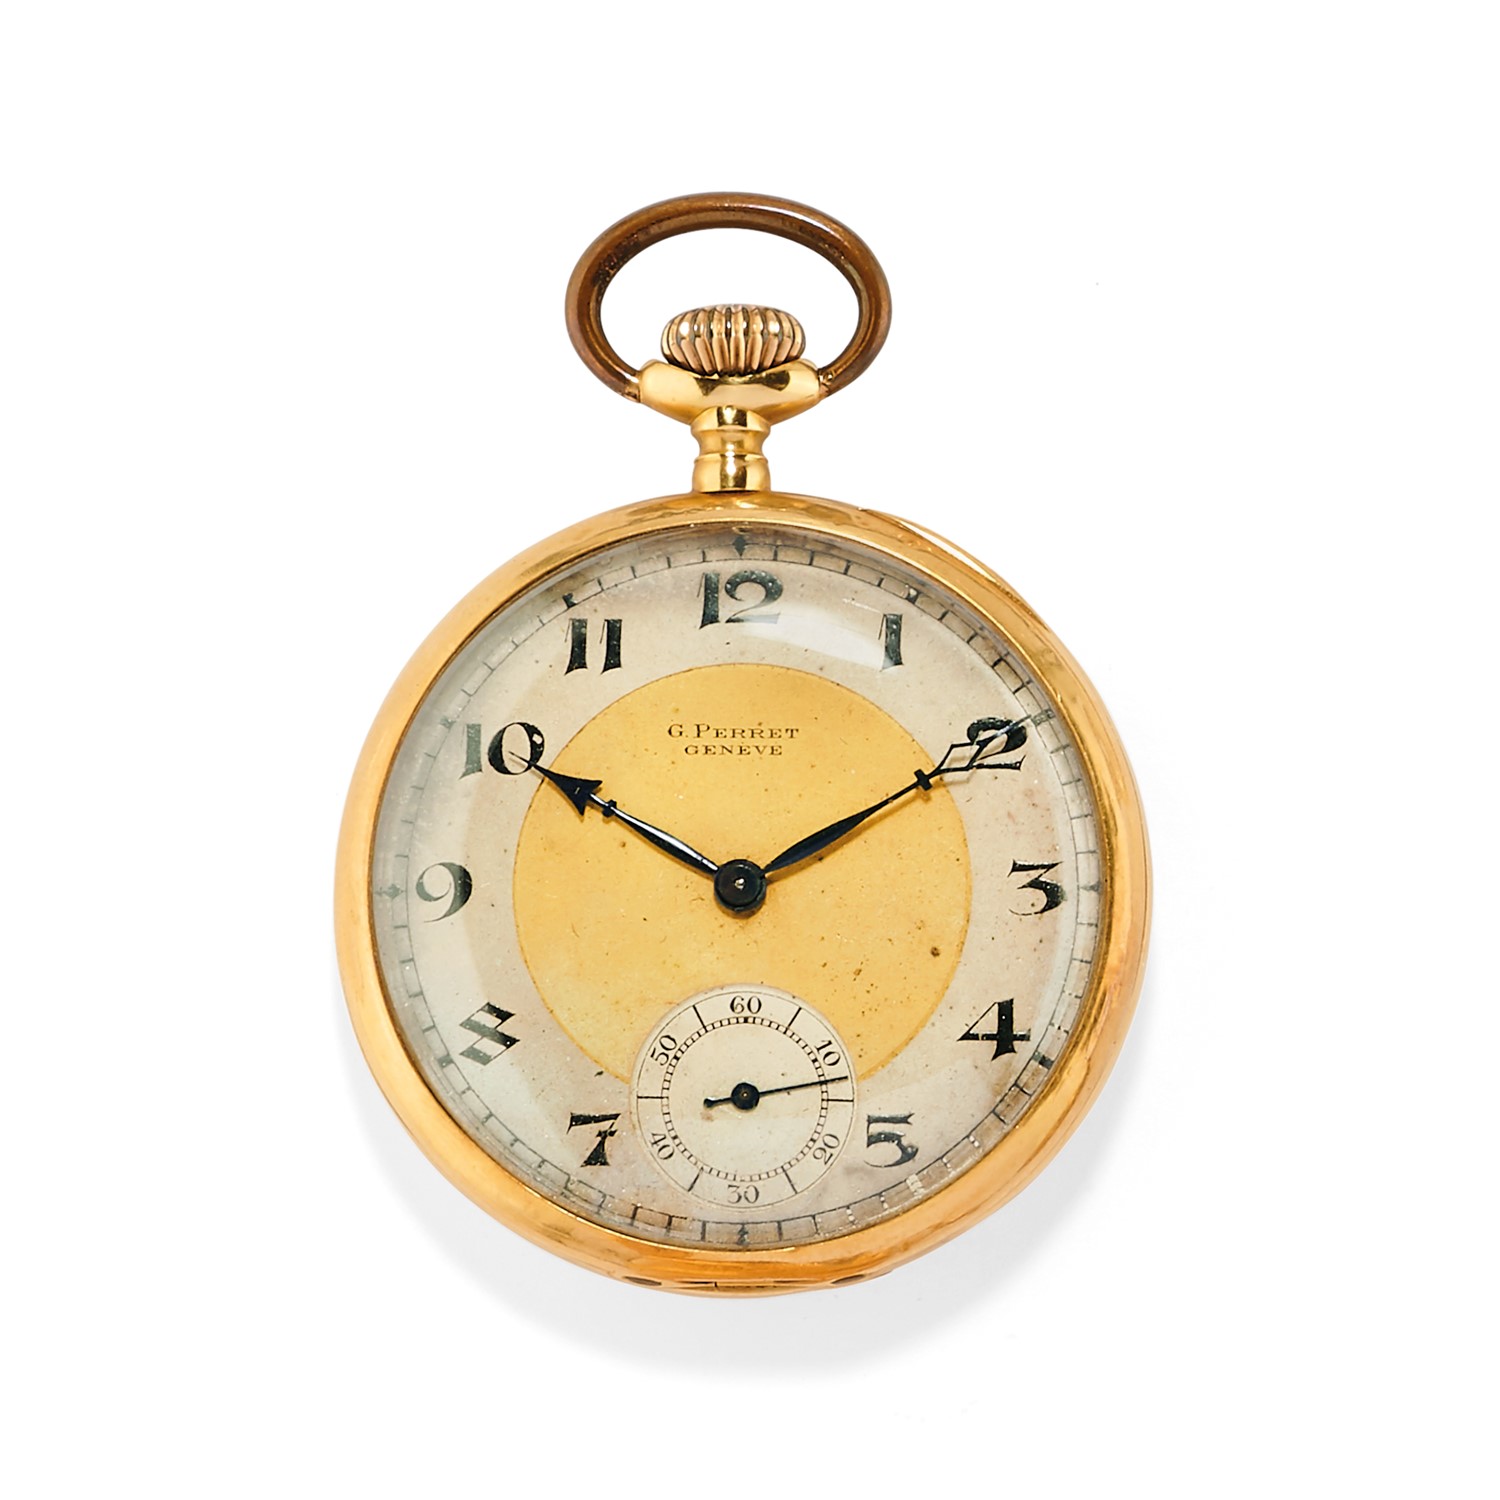 G. Perret - A 18K yellow gold pocket watch, G. Perret, defects - A 18K yellow gold [...]